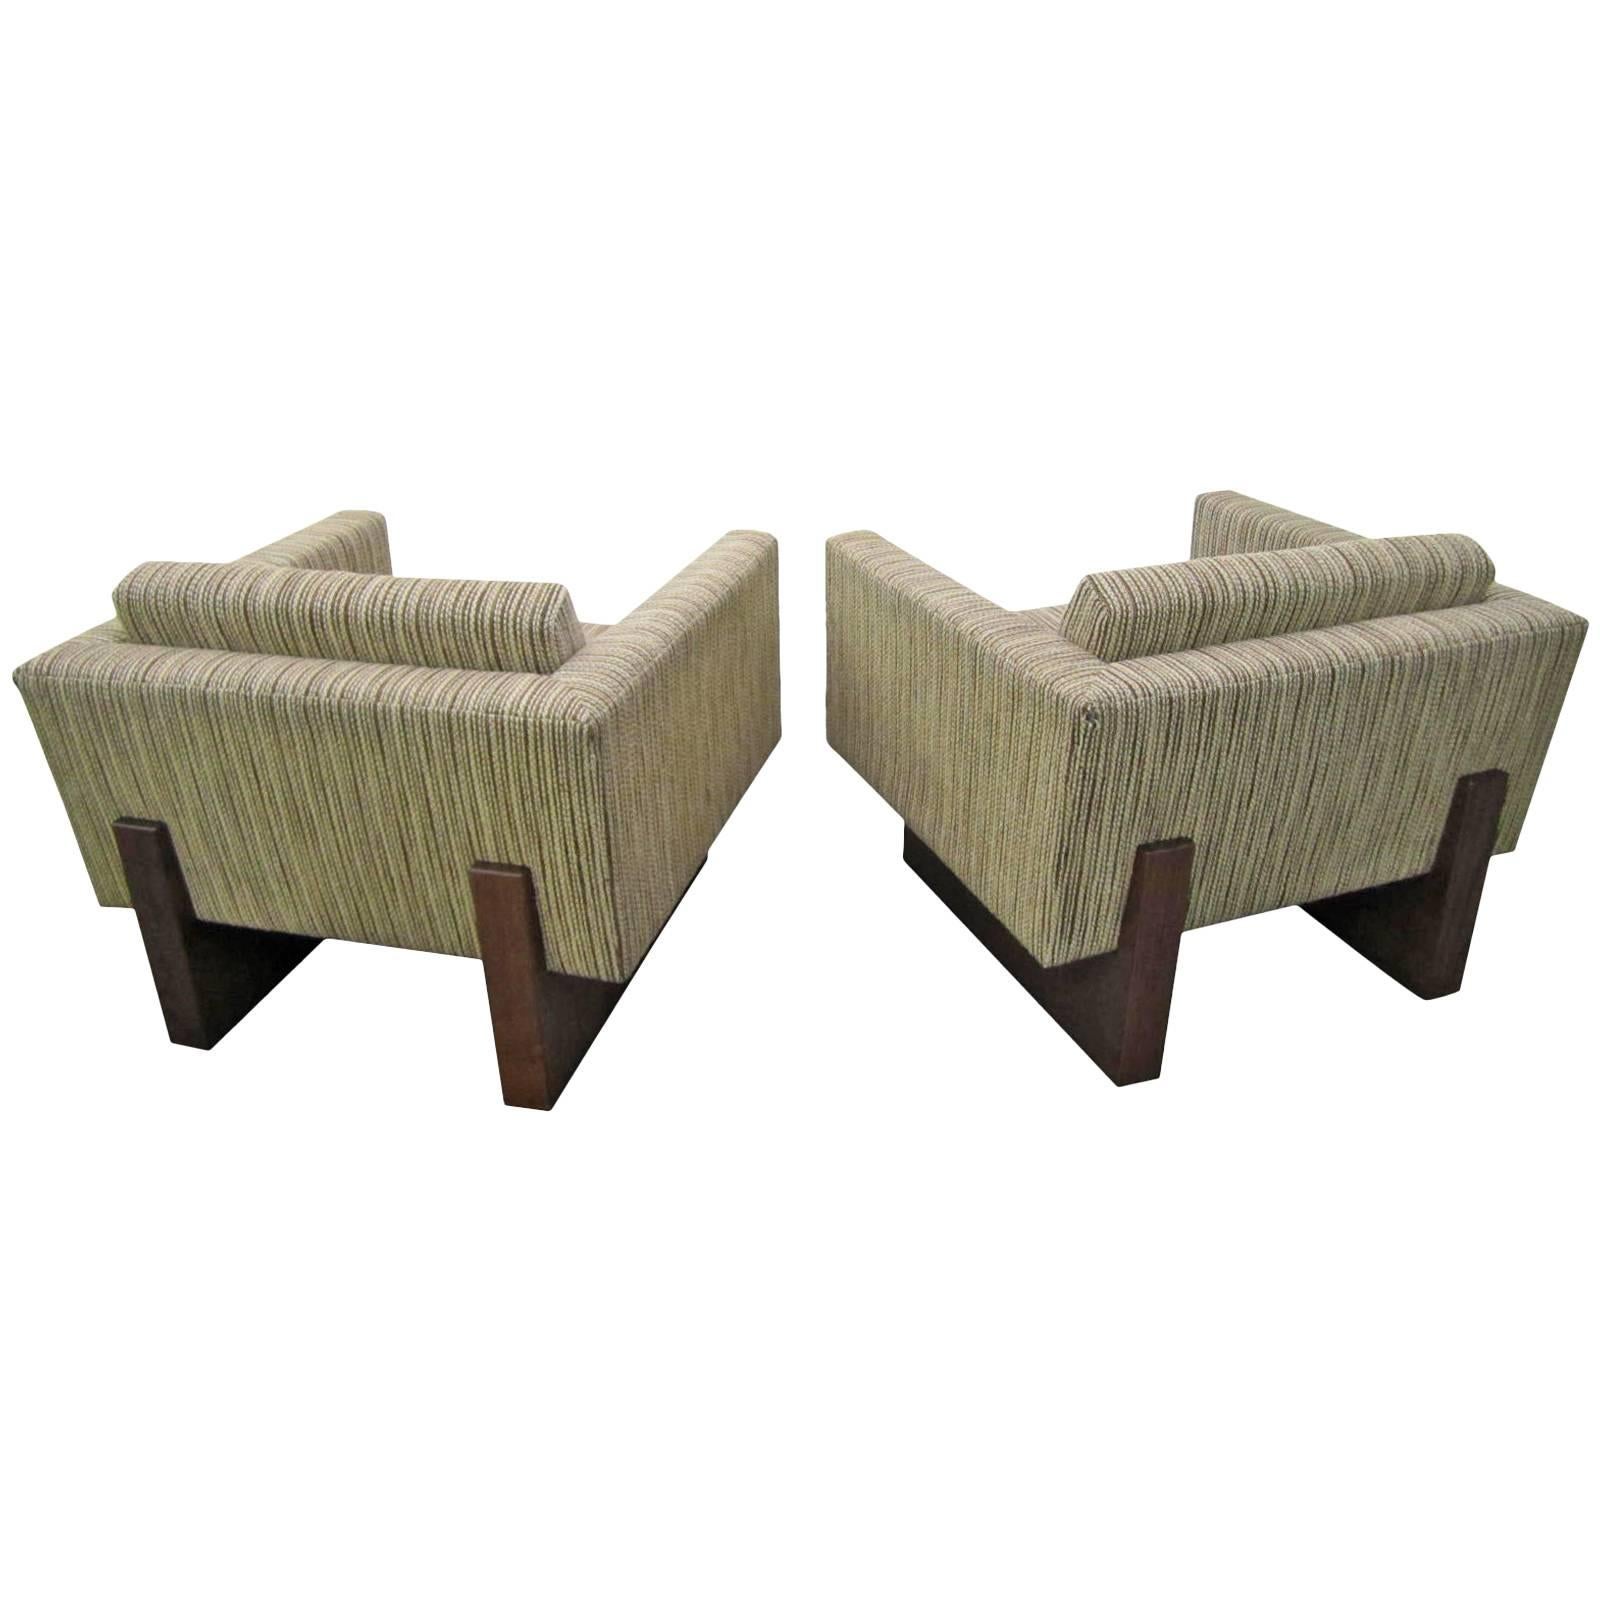 Rare Pair of Signed Harvey Probber Cube Lounge Chairs, Mid-Century Modern